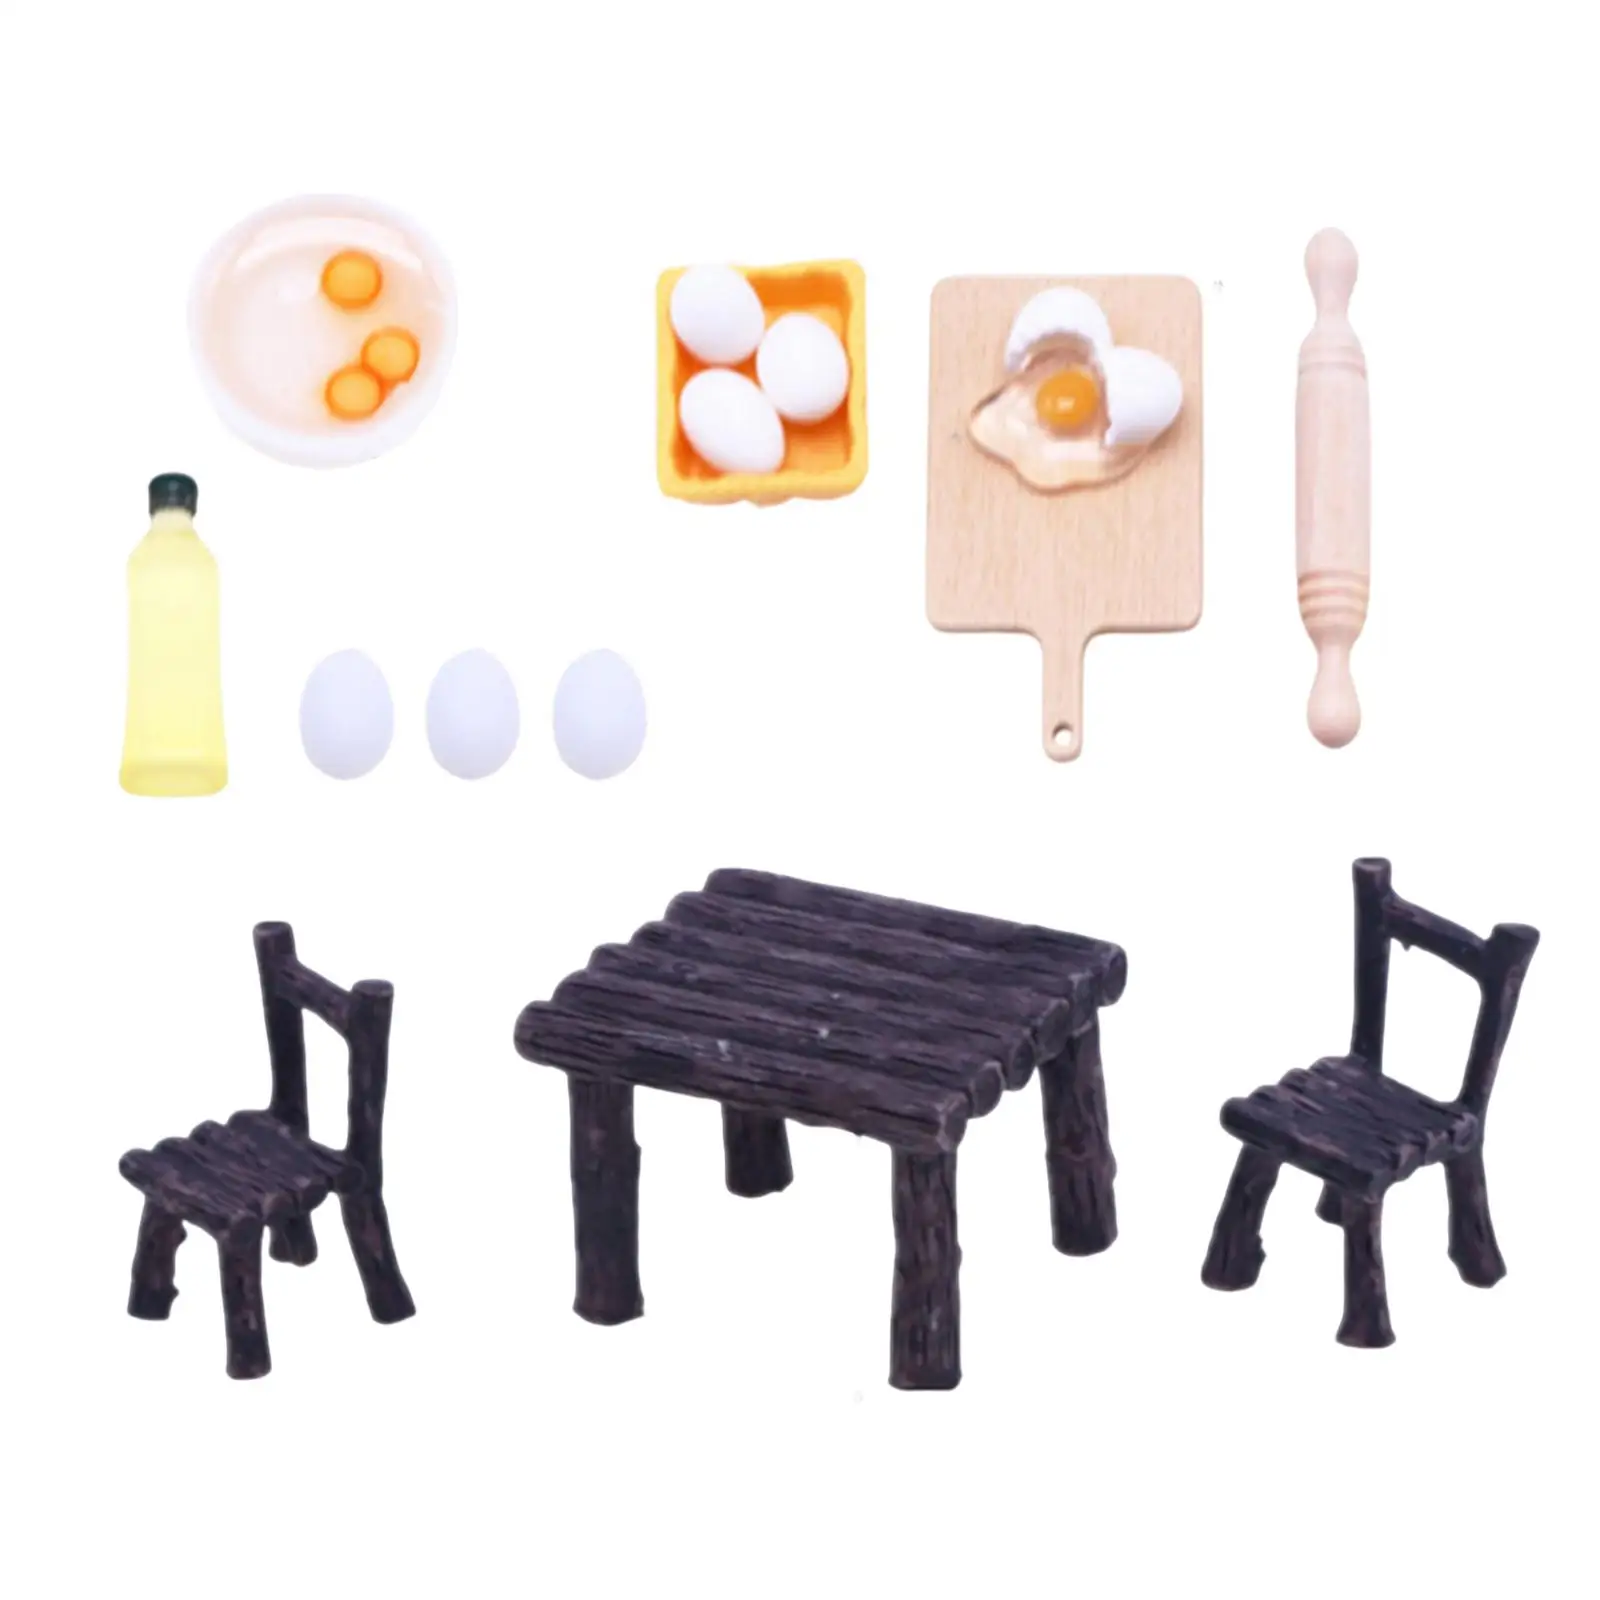 Miniature Play Sets Miniature Rolling Pin Pretend Play Toy Set Simulation Baking Scene Mini Table Chair Food Set Life Scene Gift